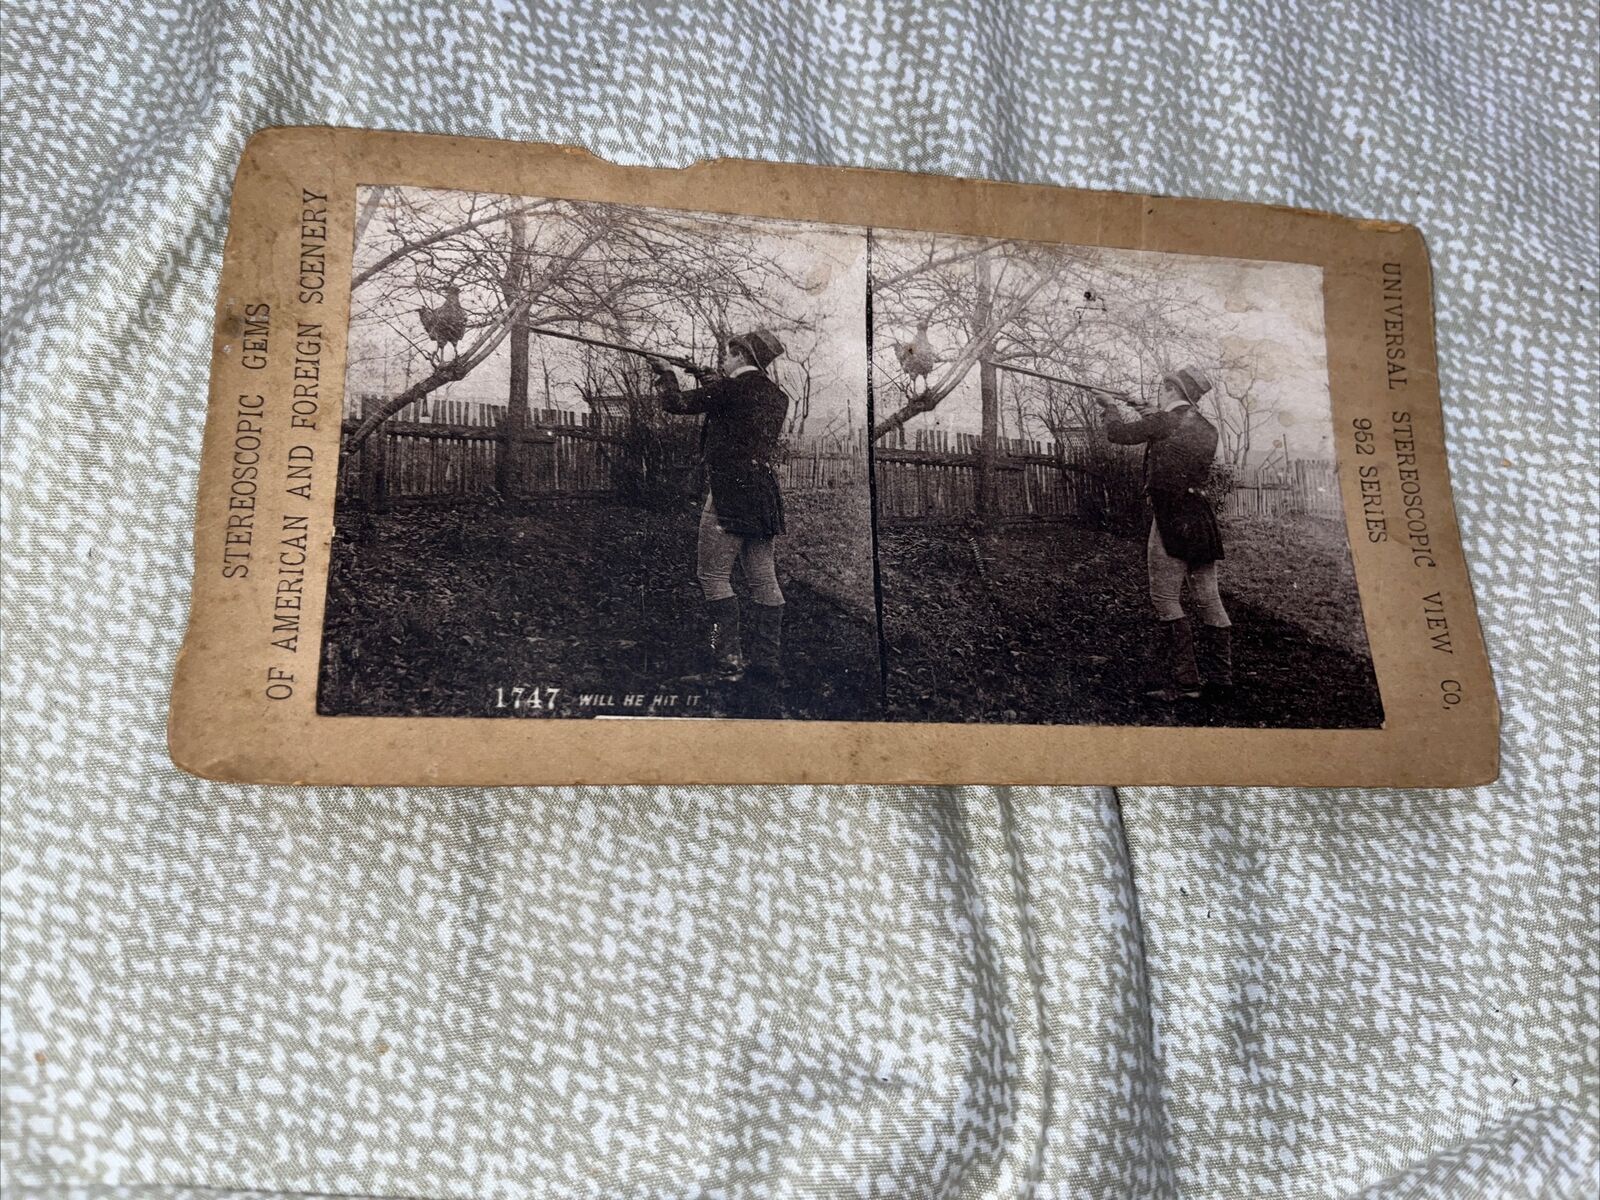 Antique Stereoview Card: Will he hit it? Man Shooting Chicken - 962 Series 1747